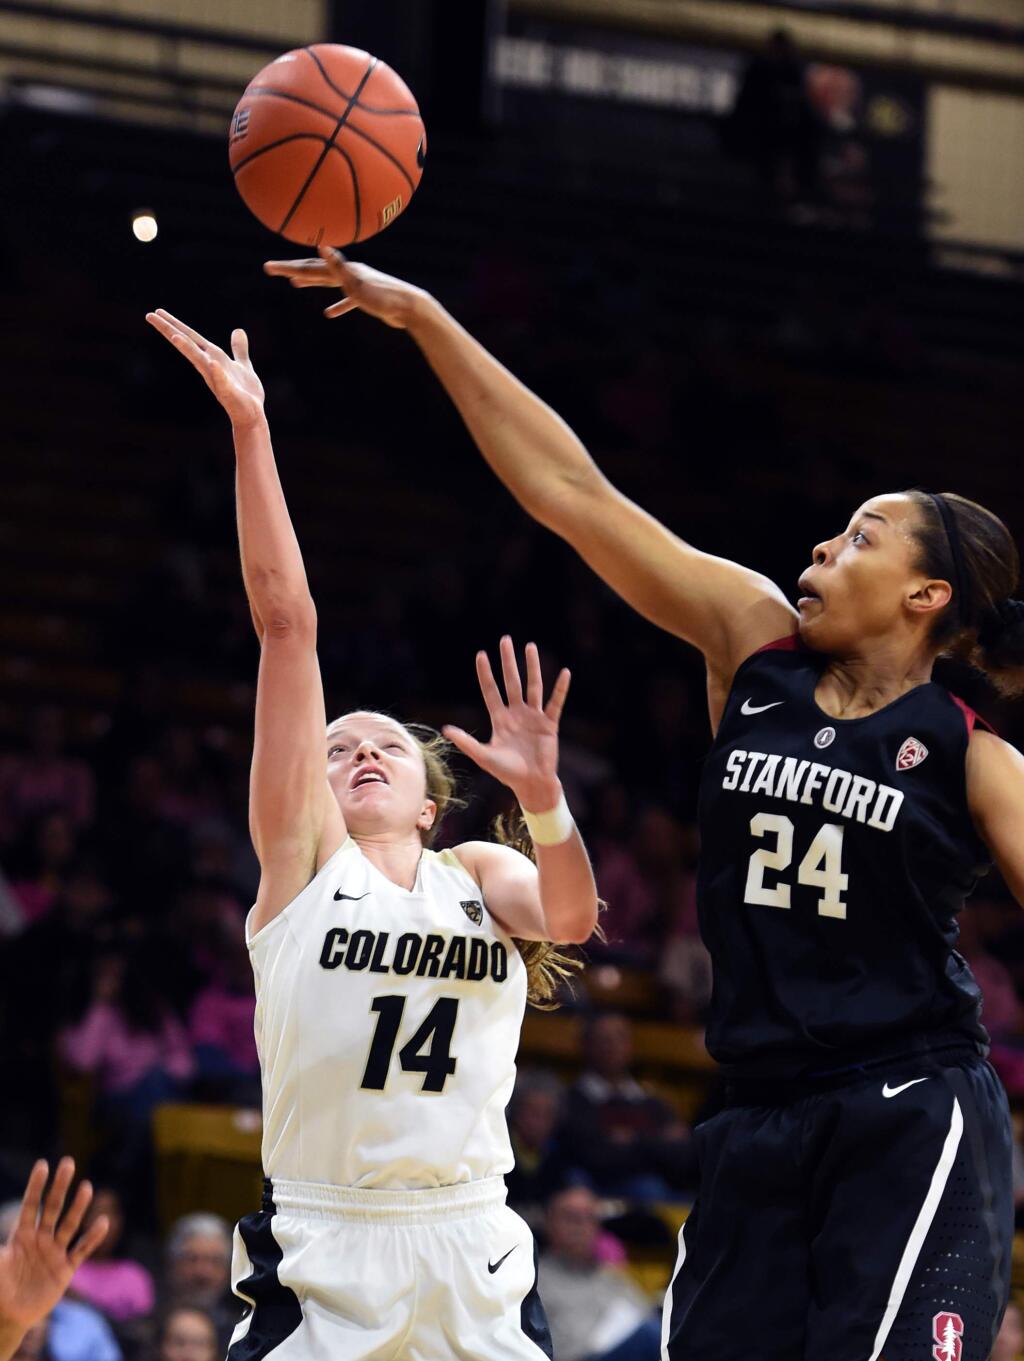 Colorado's Kennedy Leonard shoots past Stanford's Erica McCall during the first half of an NCAA college basketball game Friday, Feb. 19, 2016, in Boulder, Colo. (Cliff Grassmick/The Daily Camera via AP)